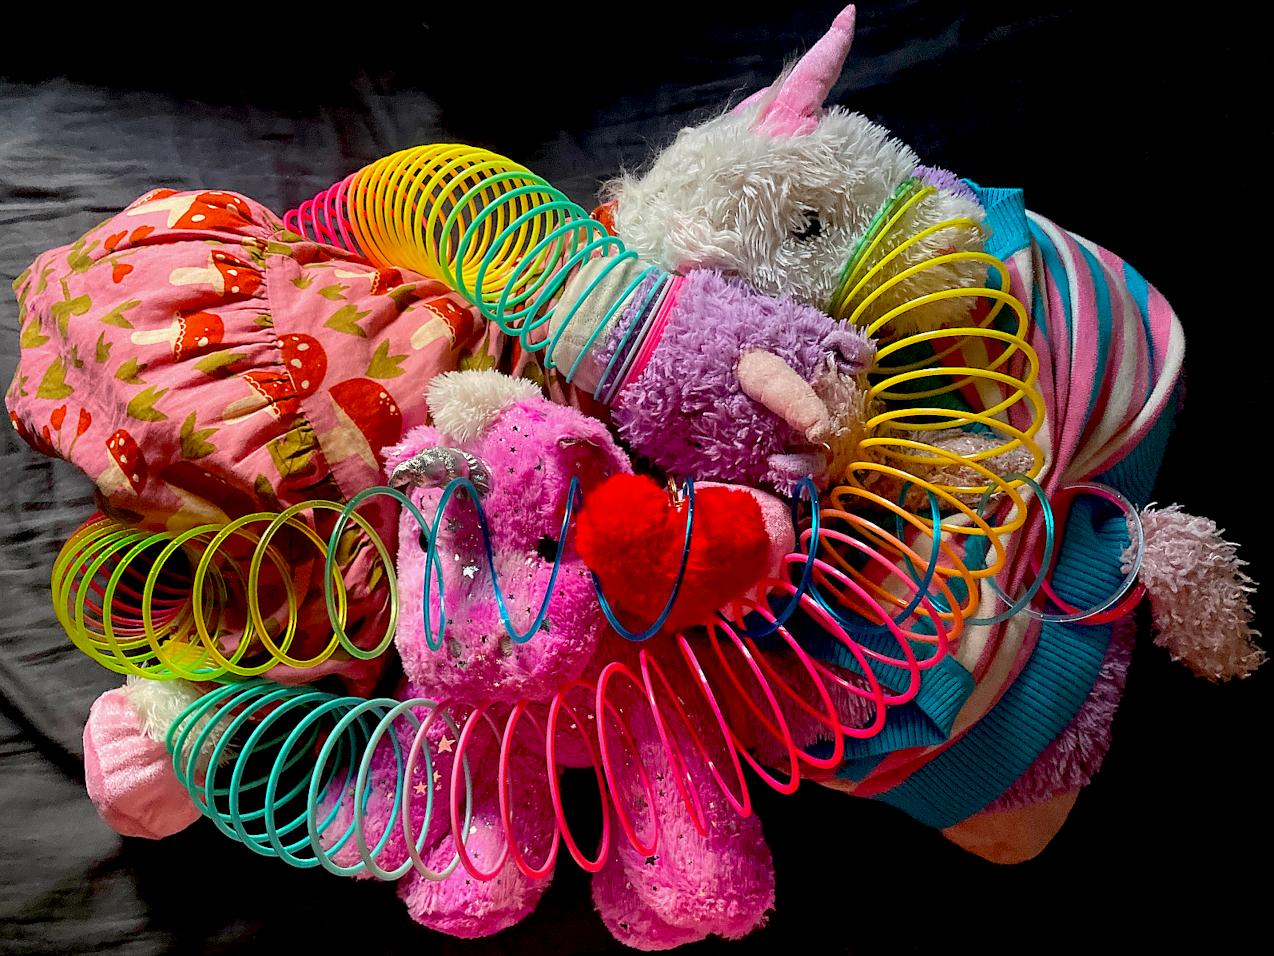 Four unicorn plushies caught in a tangled slinky cuddle puddle.